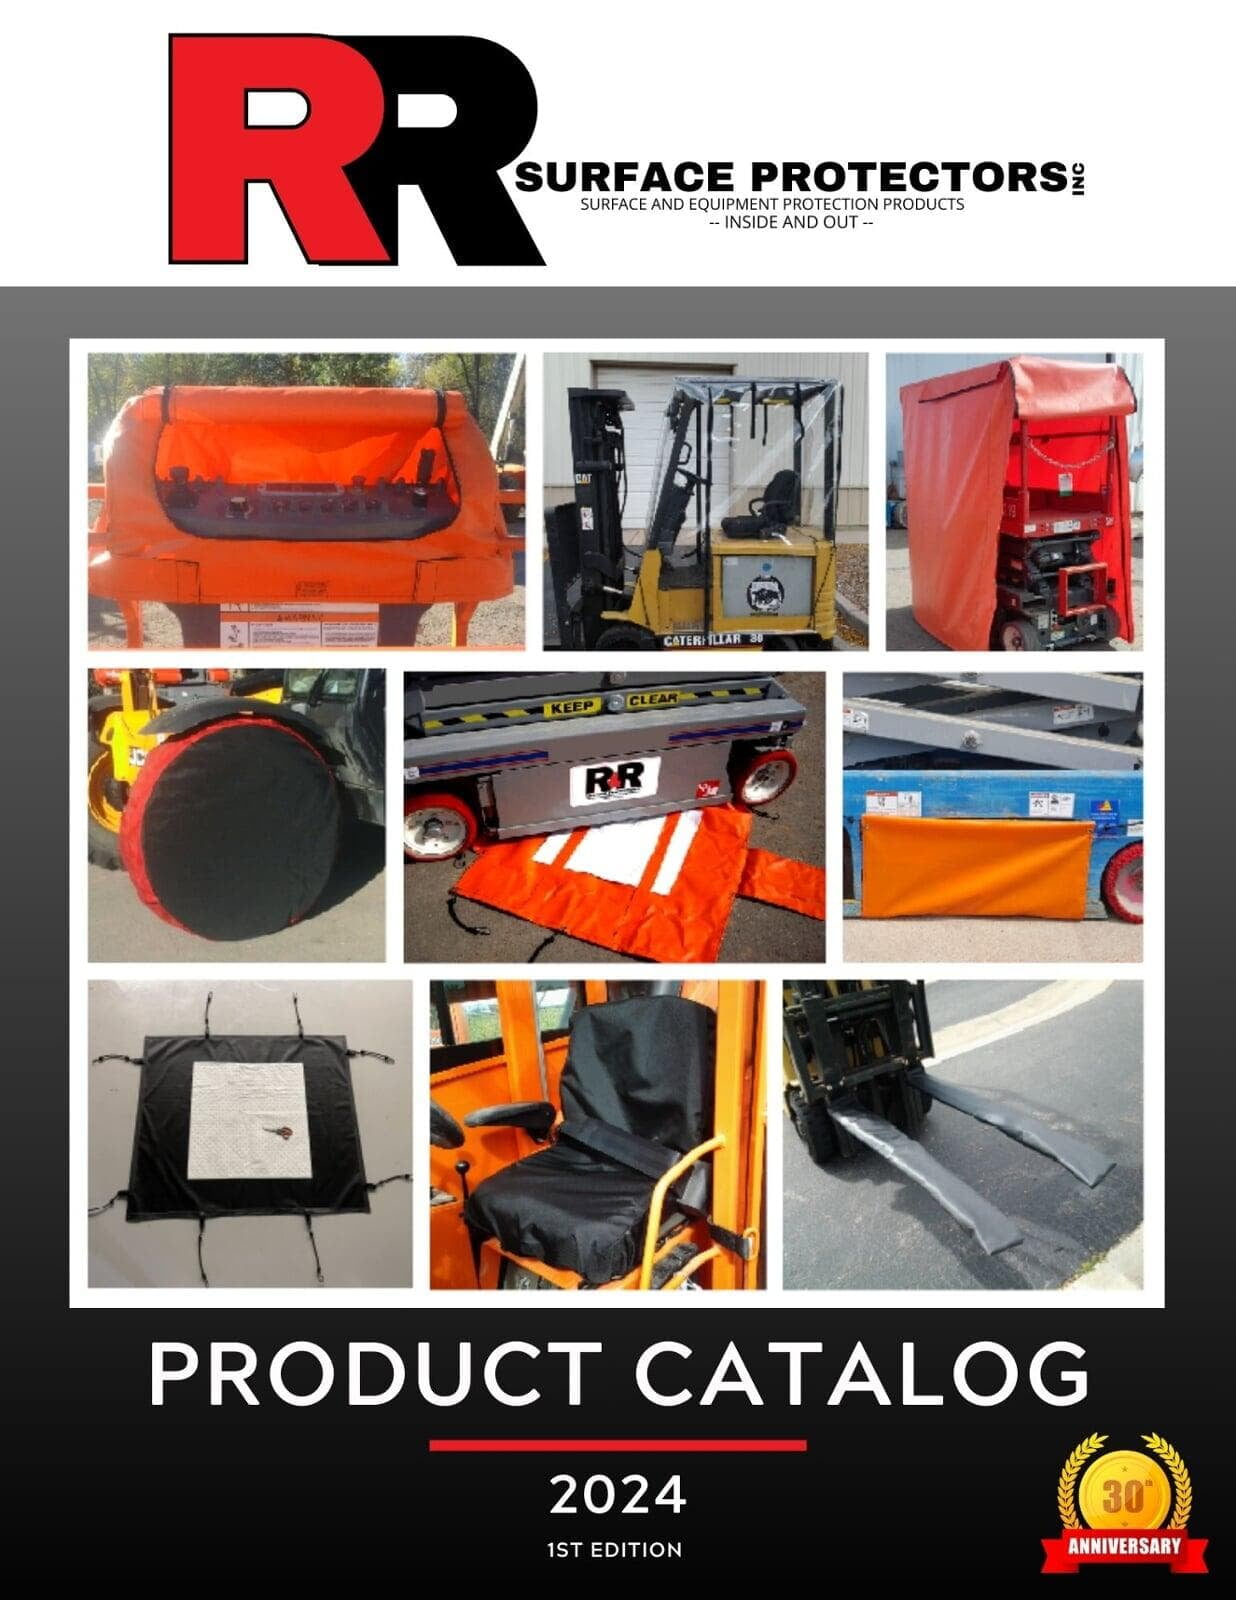 Our NEW Product Catalog with Roll-Back Pricing is available NOW!